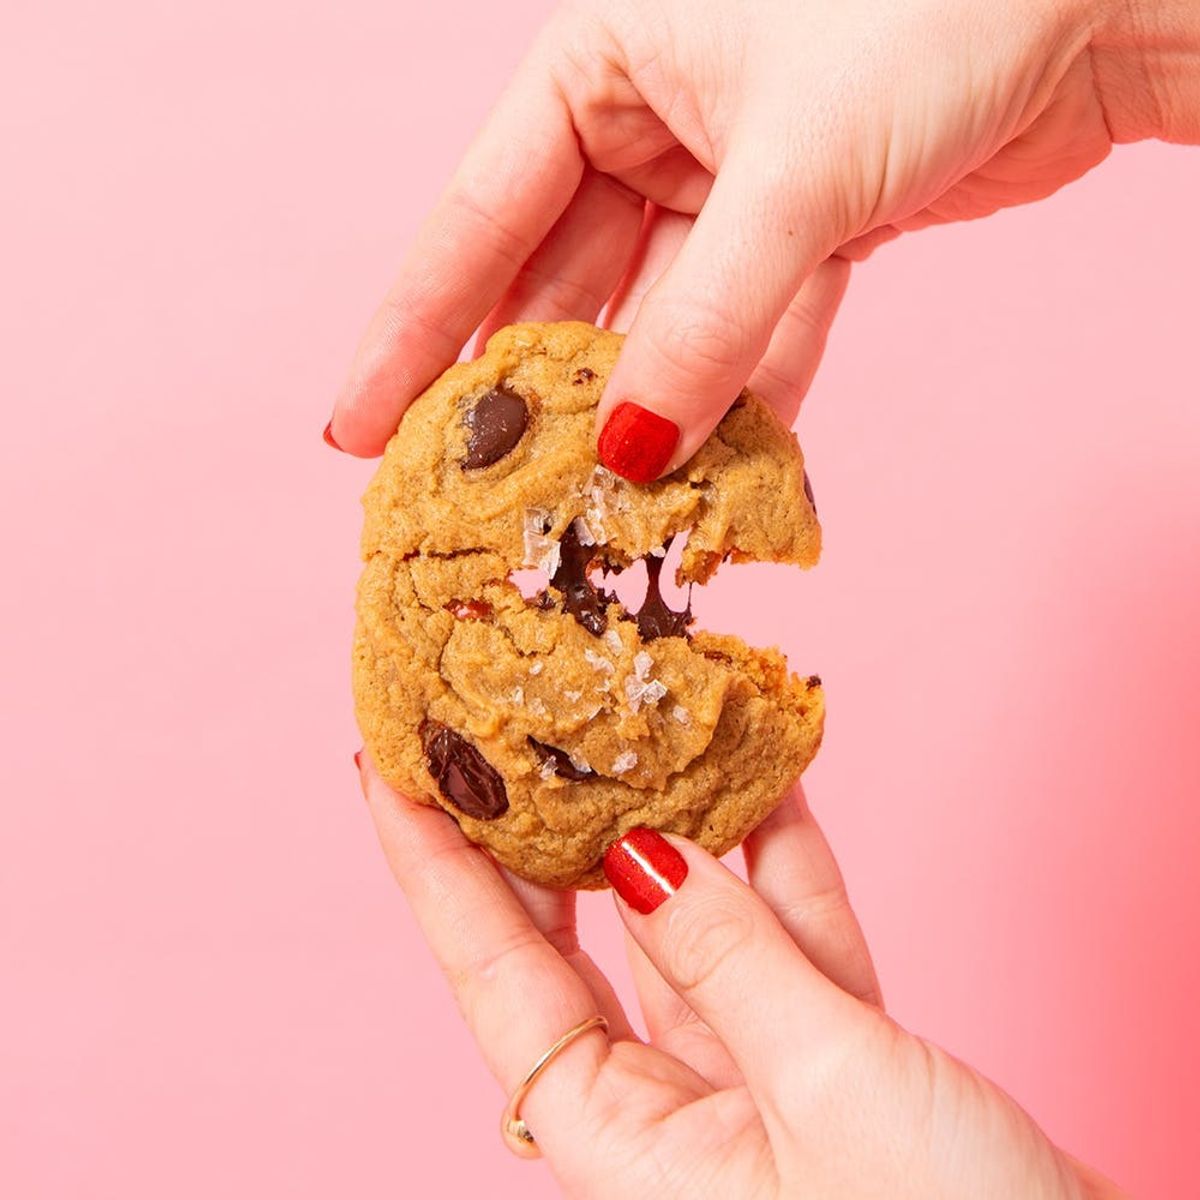 Finally! A Gluten-Free Chocolate Chip Cookie Recipe That Tastes Anything but GF